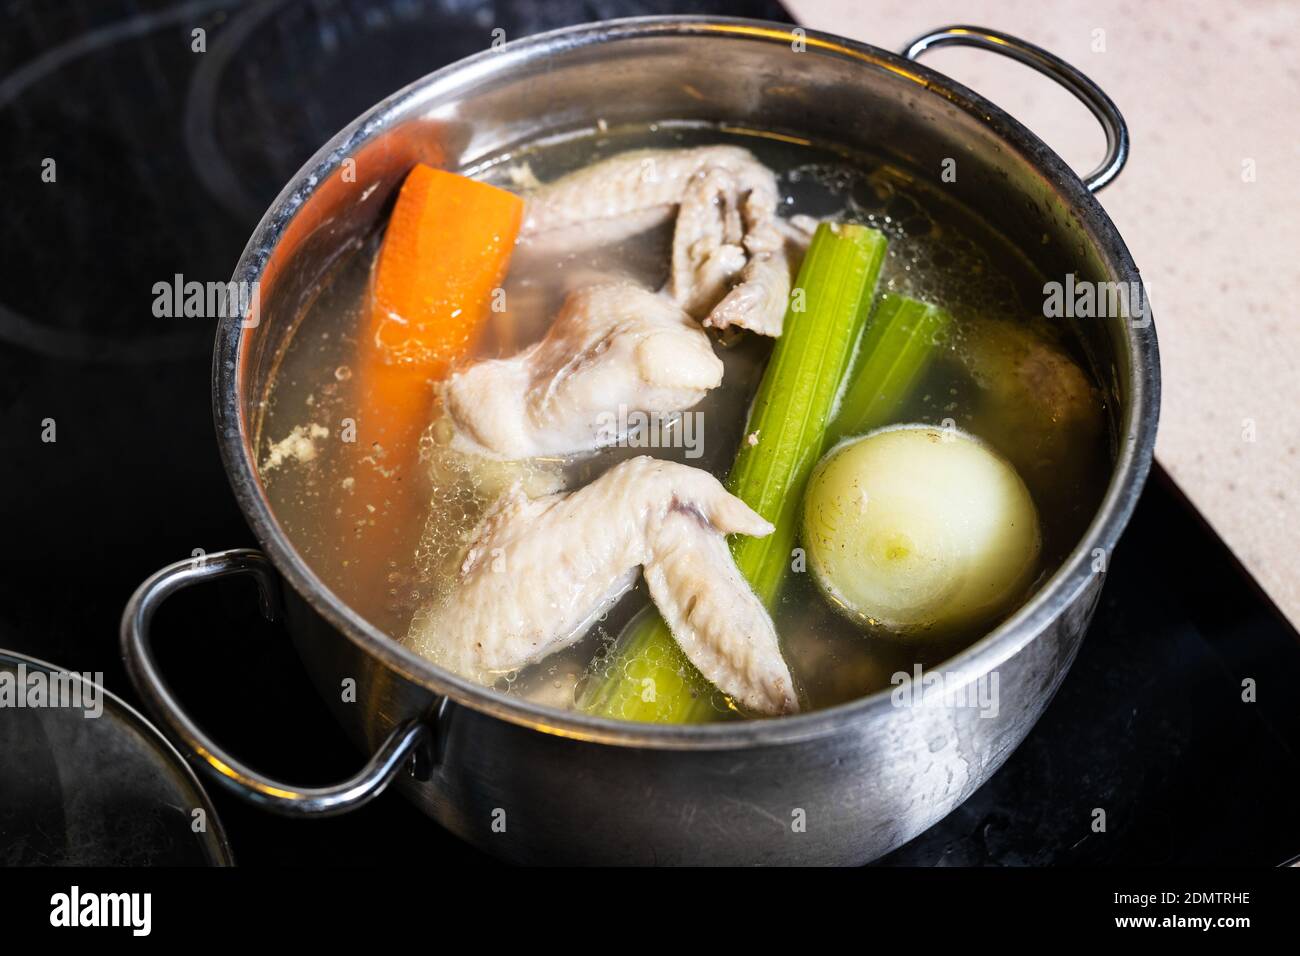 chicken wings soup is cooked in steel stewpot close up on stove at home kitchen isolated on white background Stock Photo